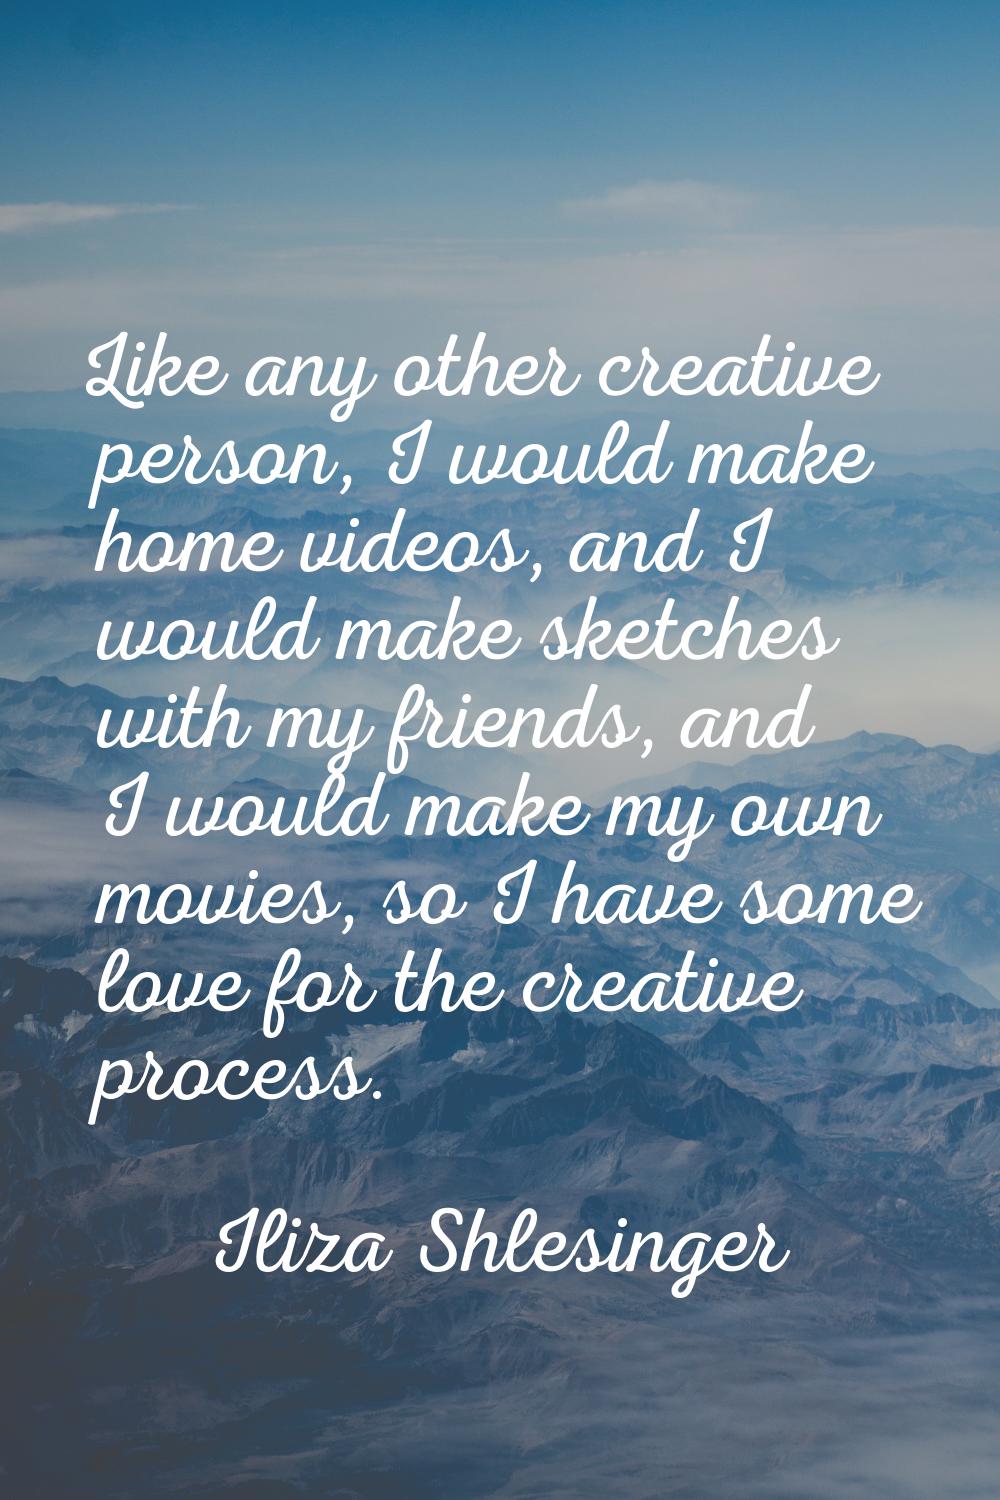 Like any other creative person, I would make home videos, and I would make sketches with my friends